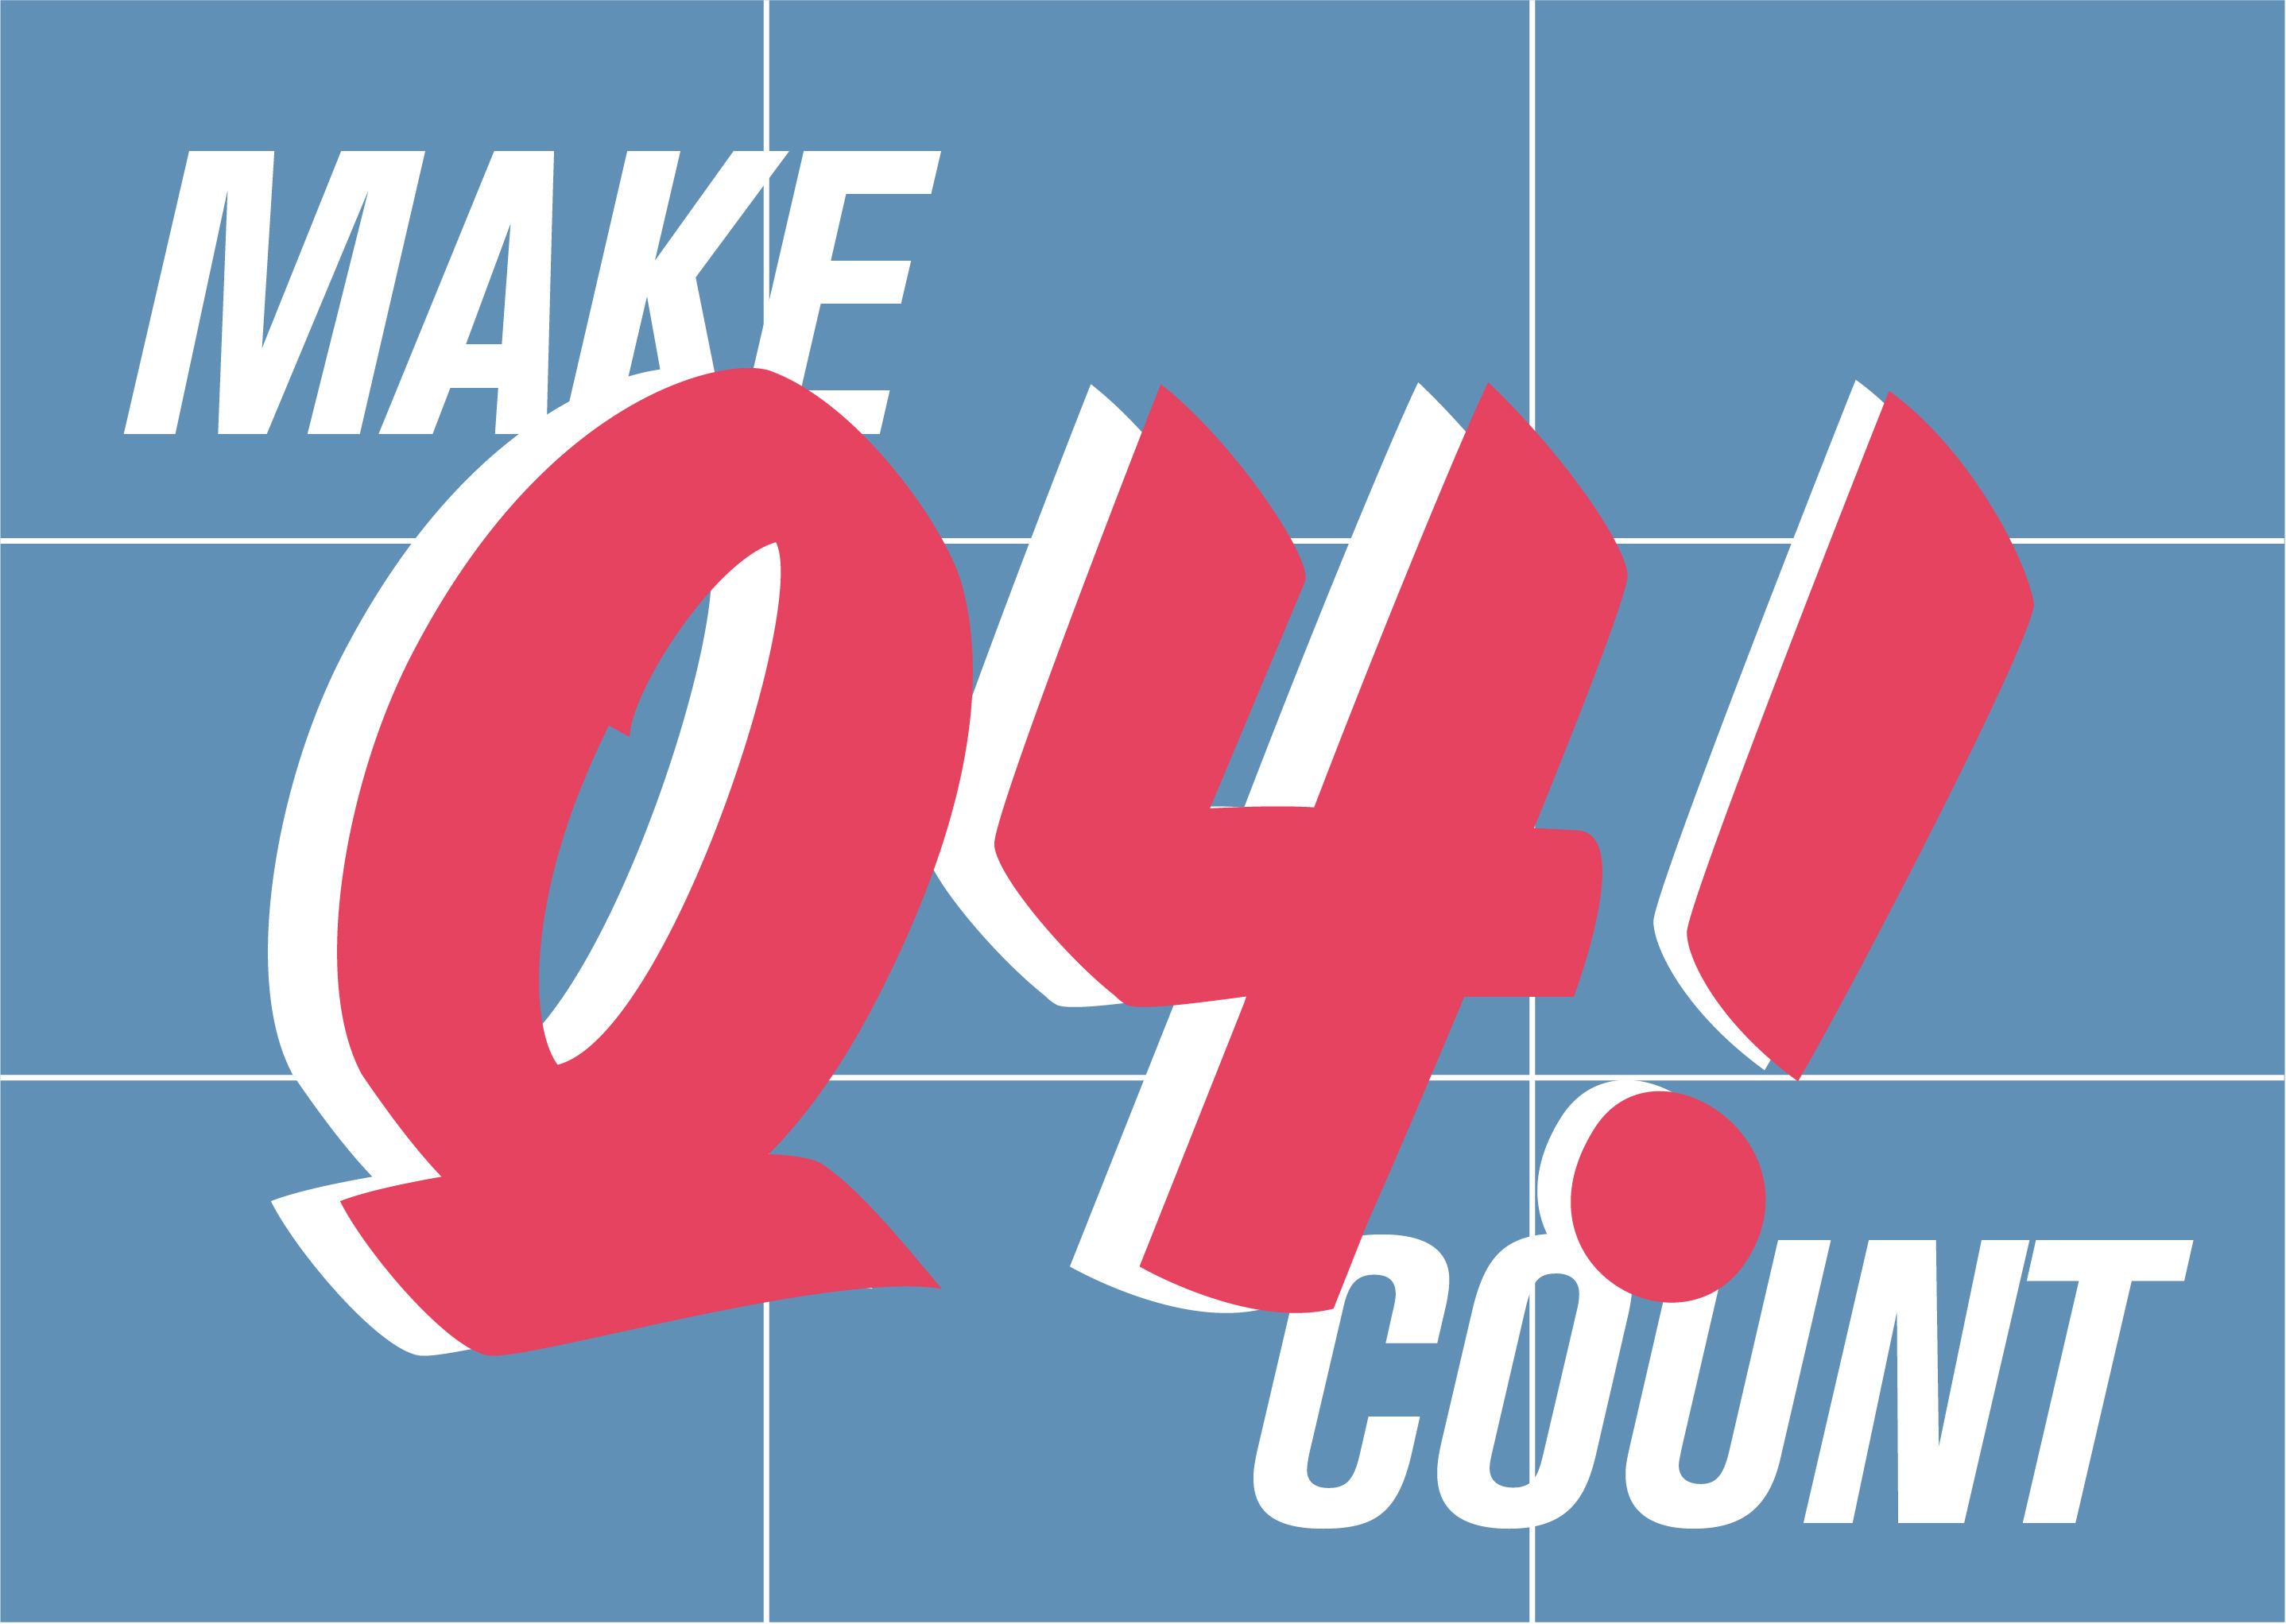 Large white and pink letters spell out Make Q4 count on a blue, gridded background.